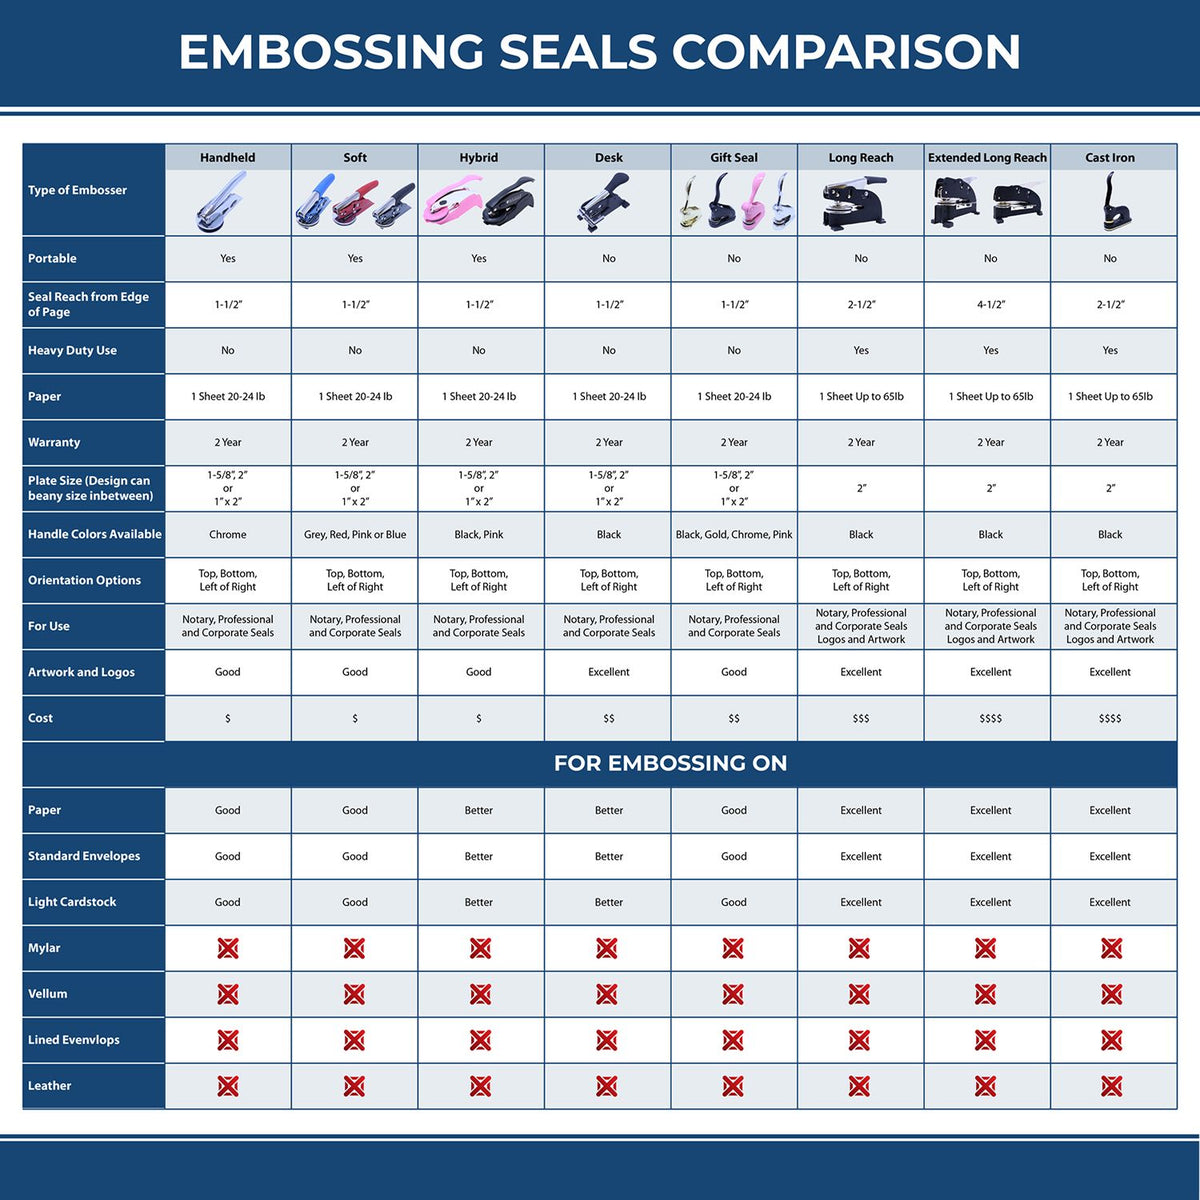 A comparison chart for the different types of mount models available for the Gift Alaska Land Surveyor Seal